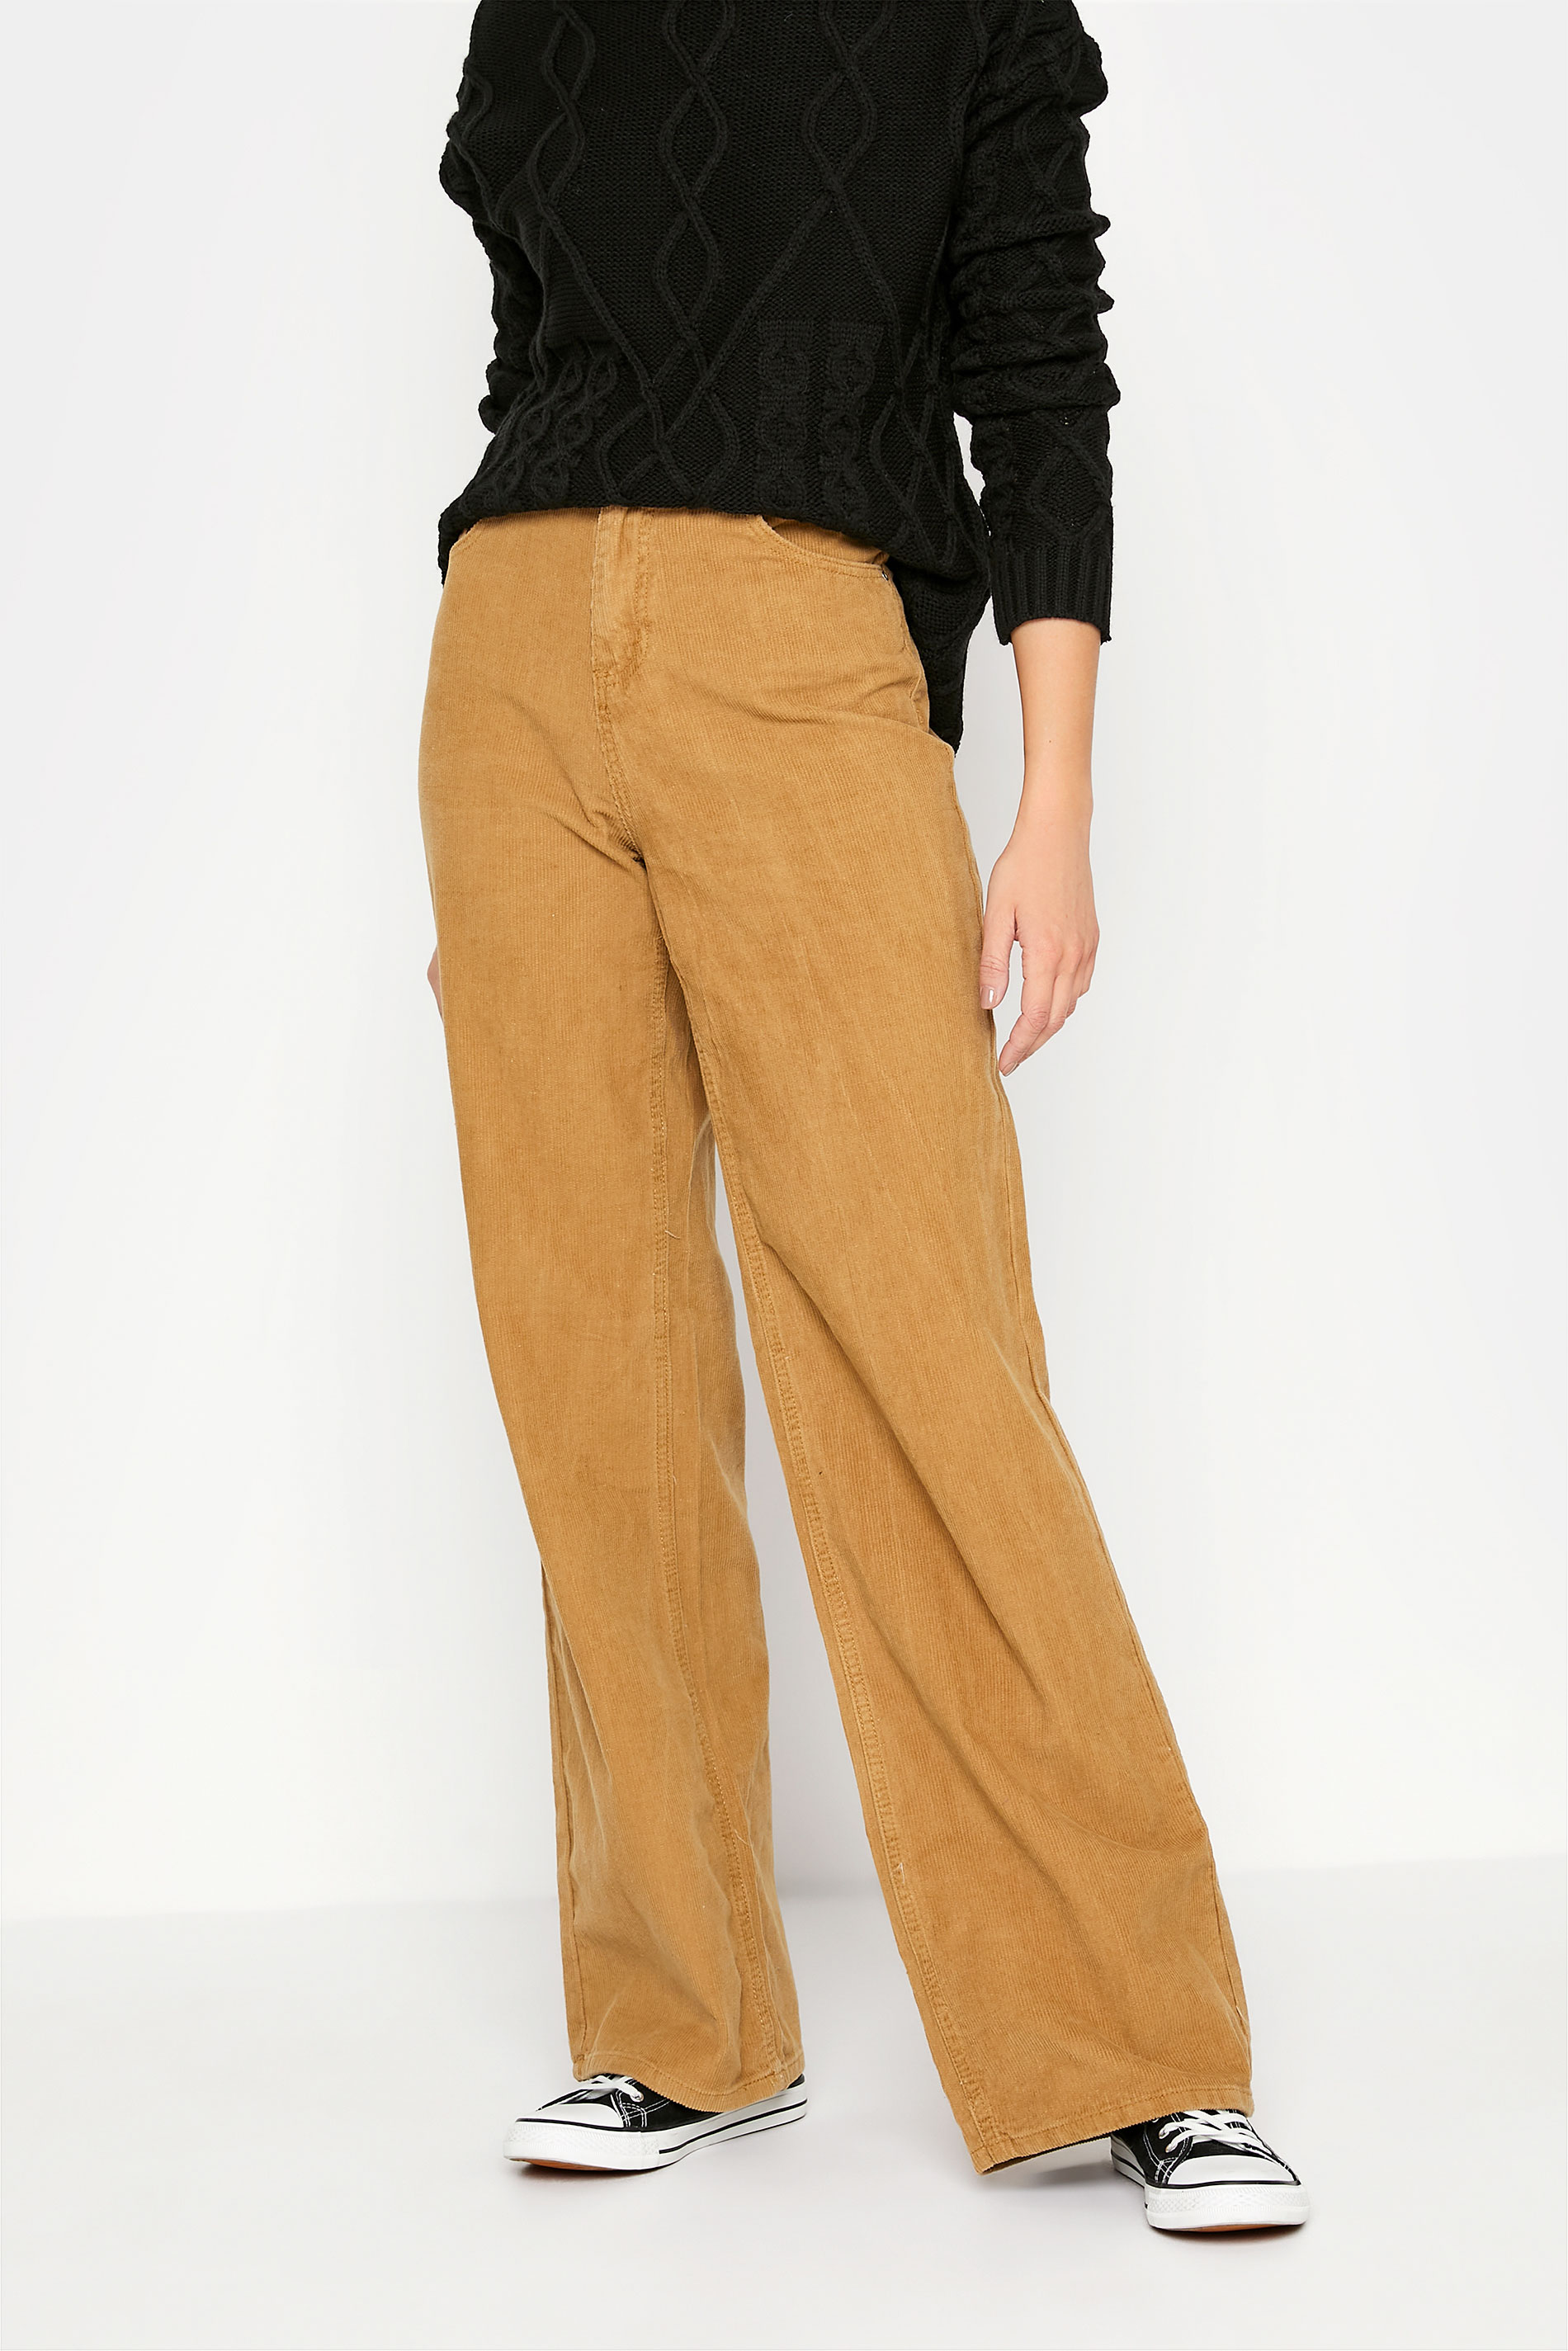 Corduroy trousers  brings power to your step  Monki